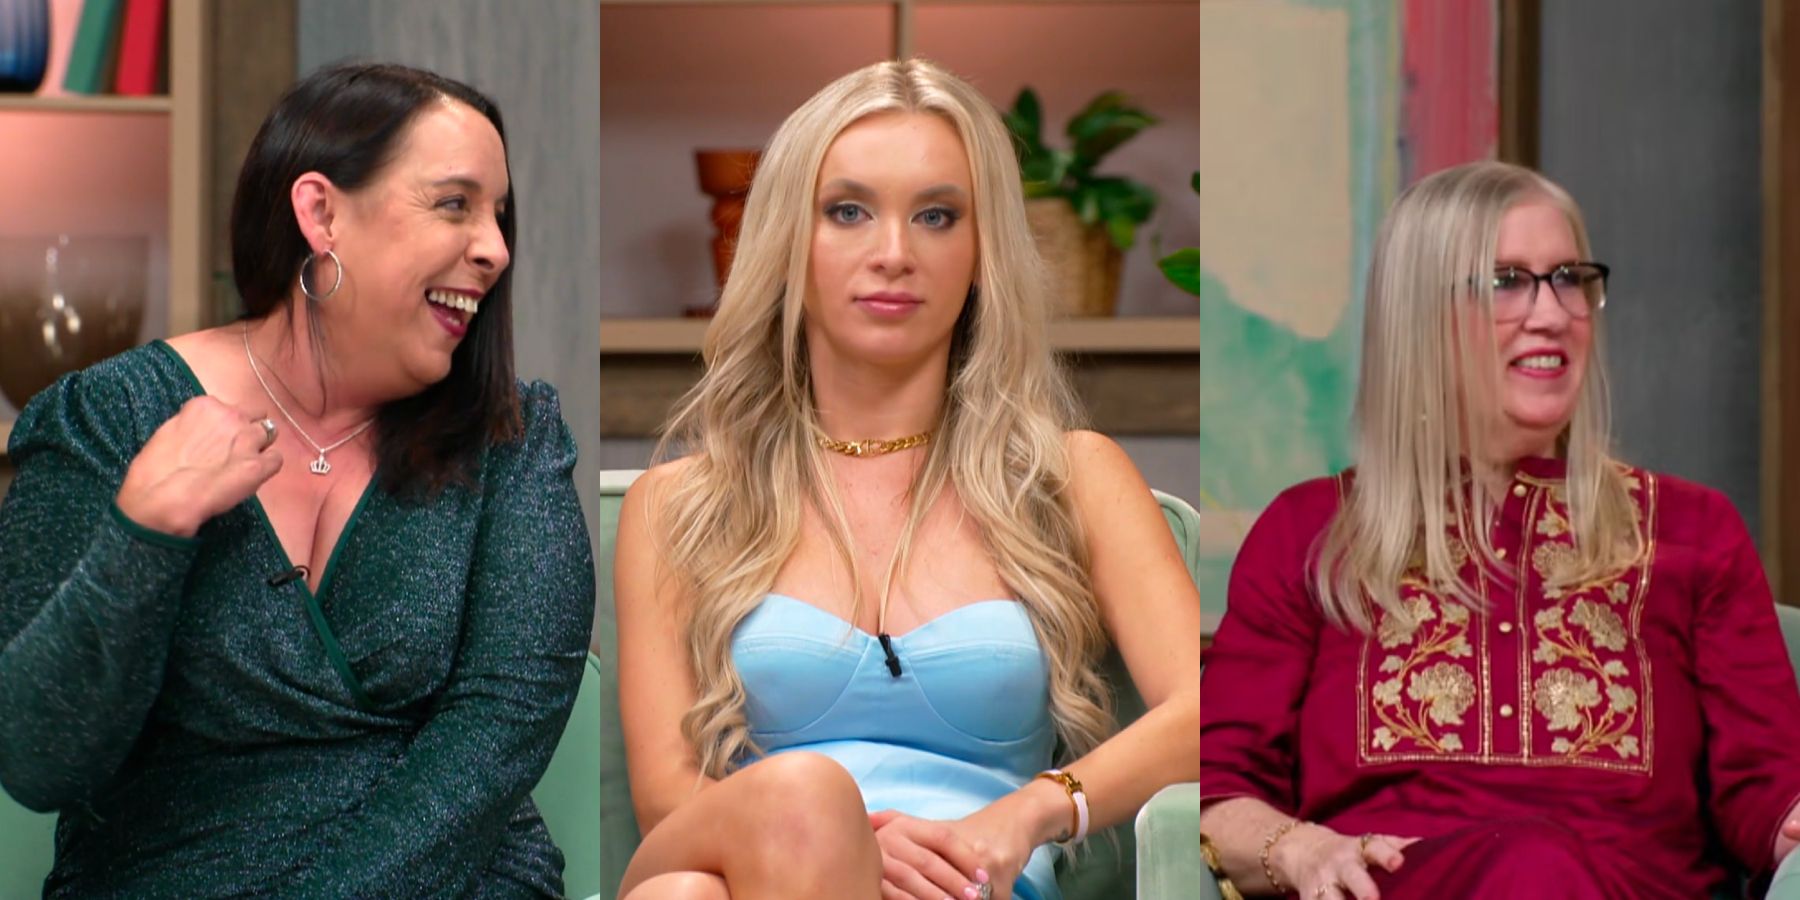 Why 90 Day Fiancé Cast Wore Same Outfits For Four Part Tell-All